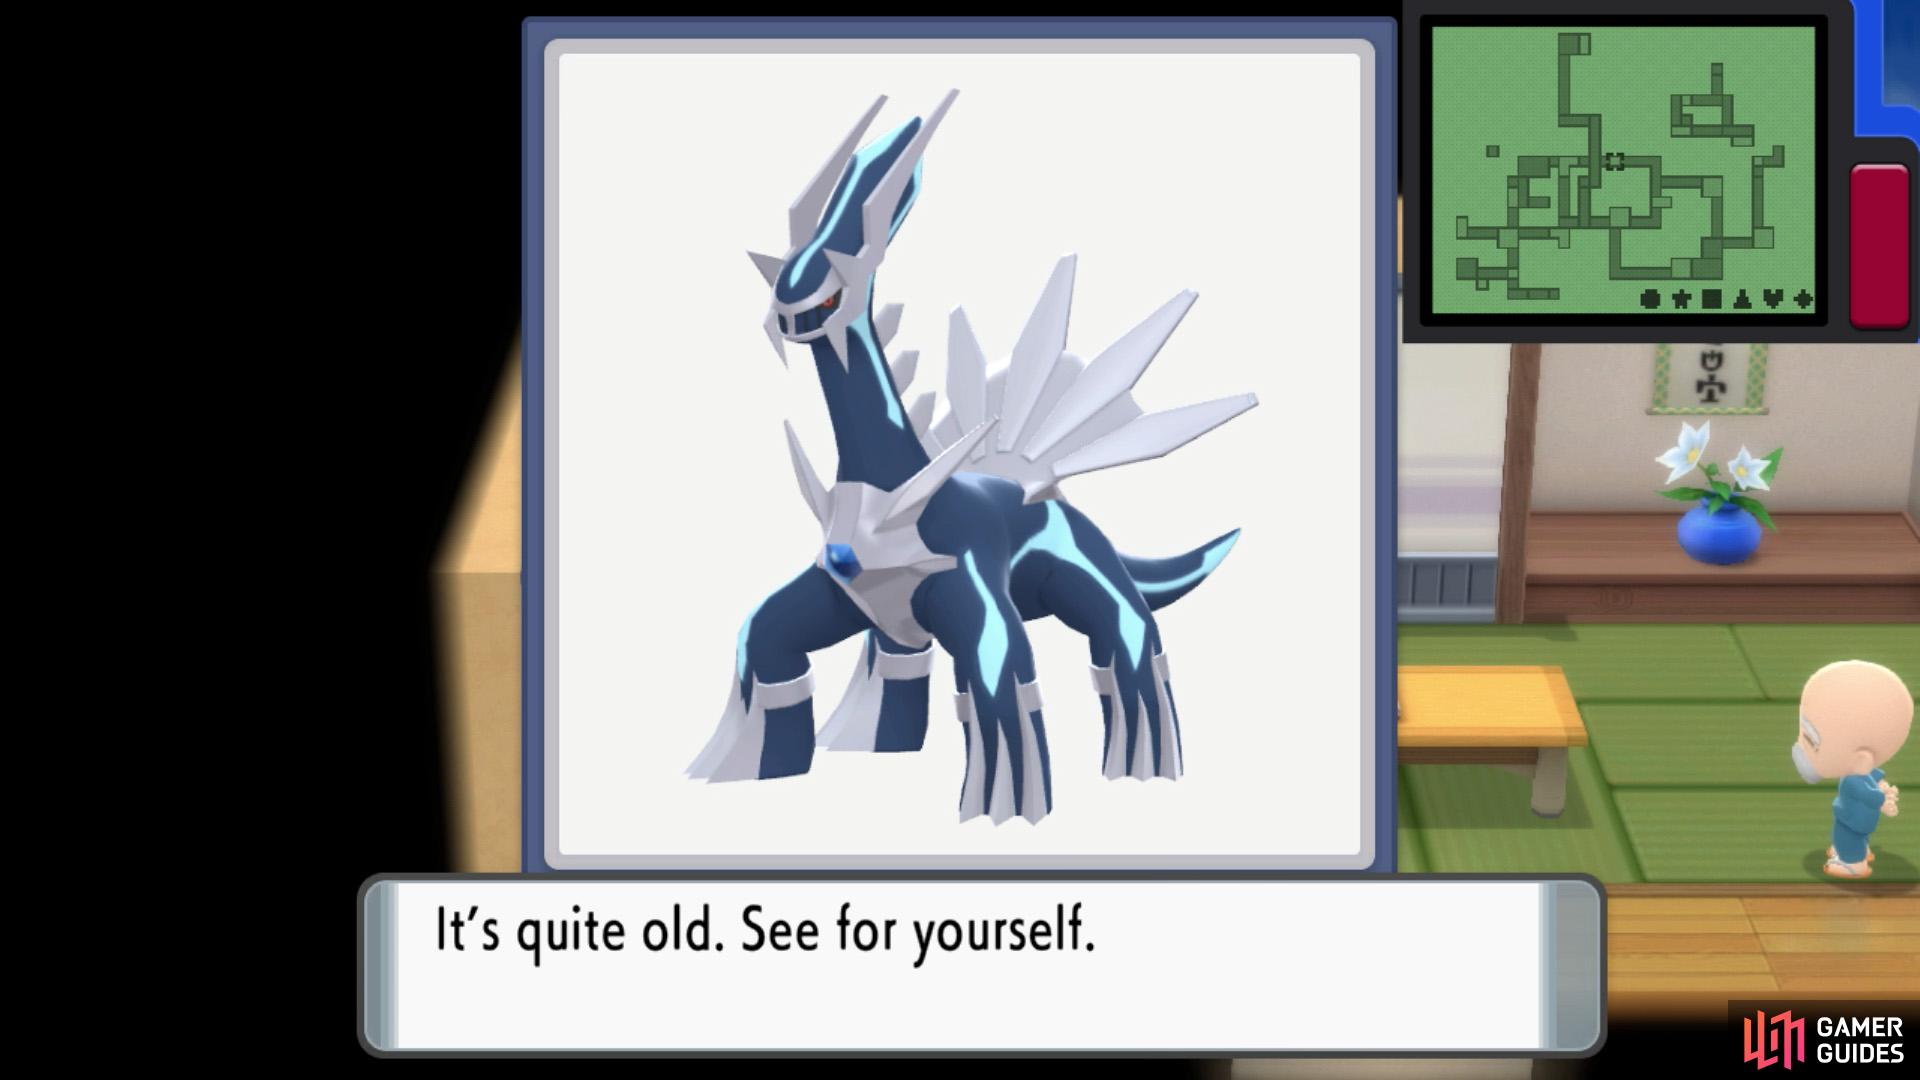 The old lady will show you Palkia or Dialga's data.